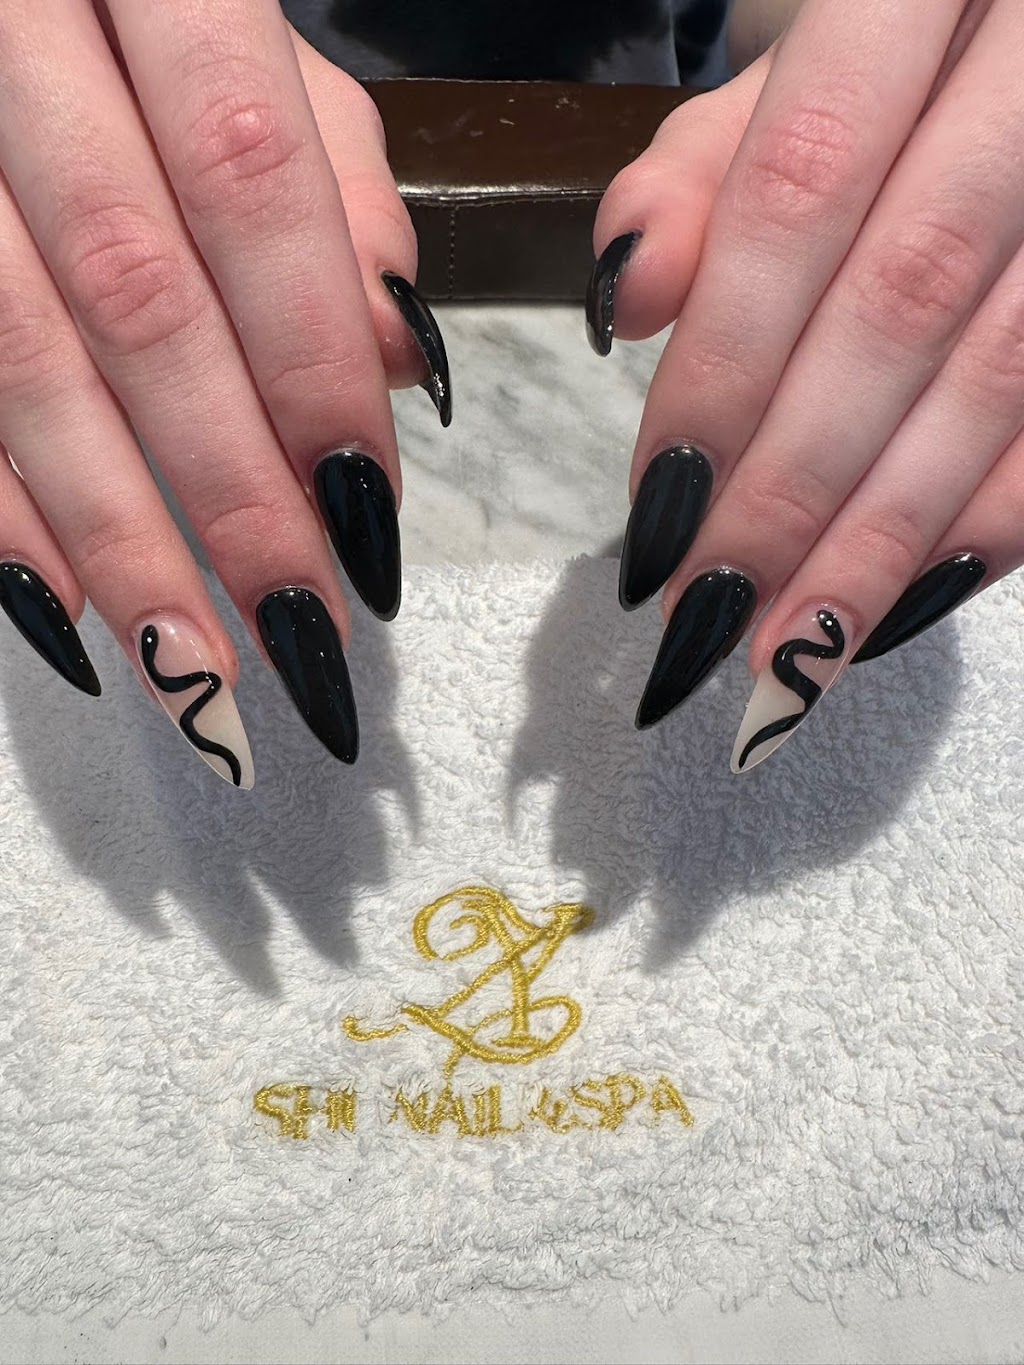 Shi Nails & Spa 2 | 1572 Wilmington Pike suite 8, West Chester, PA 19382 | Phone: (484) 841-6620